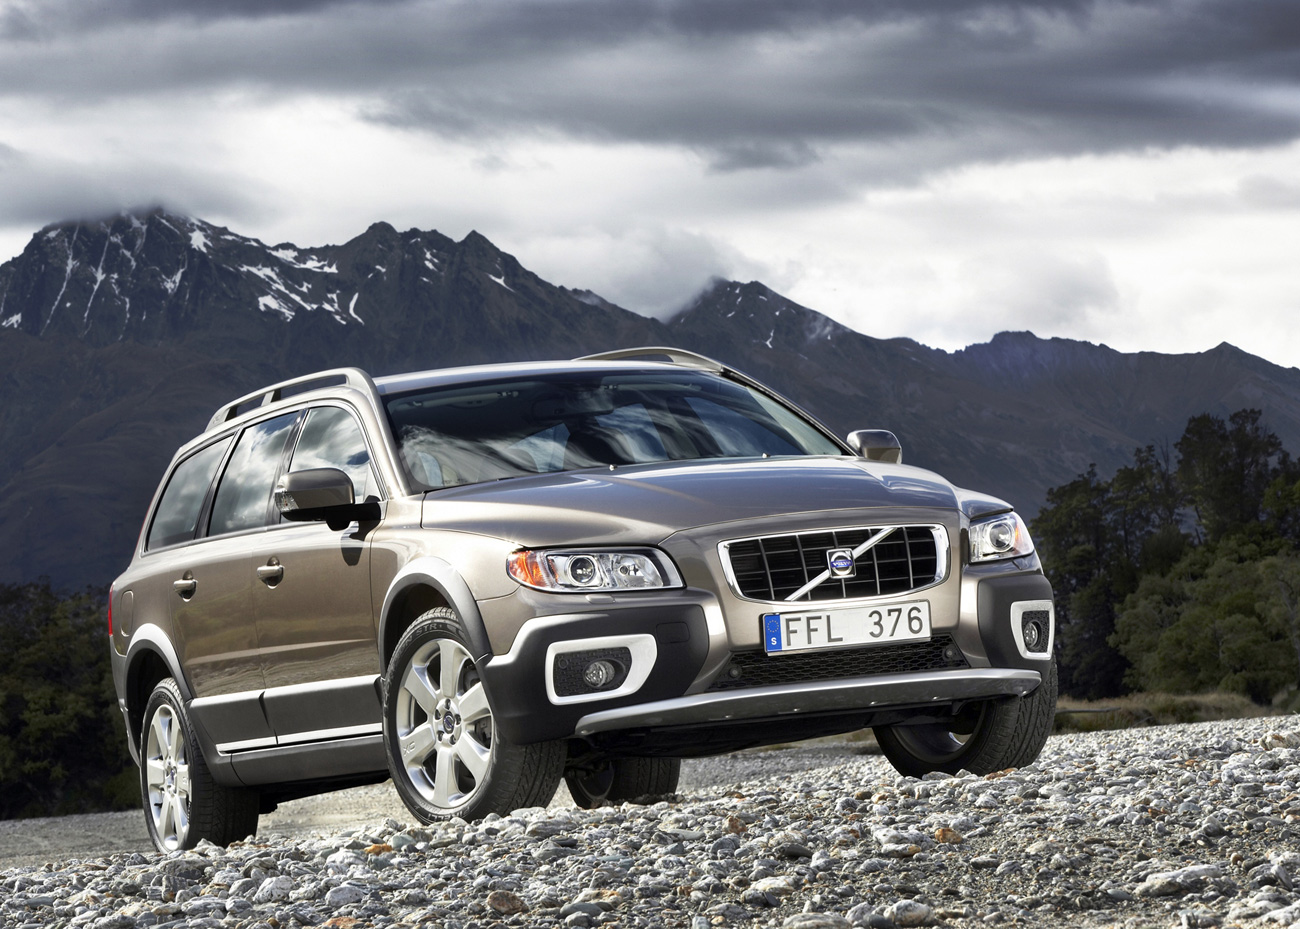 Volvo has released the first official pics of the new 2008 Volvo XC70 a few